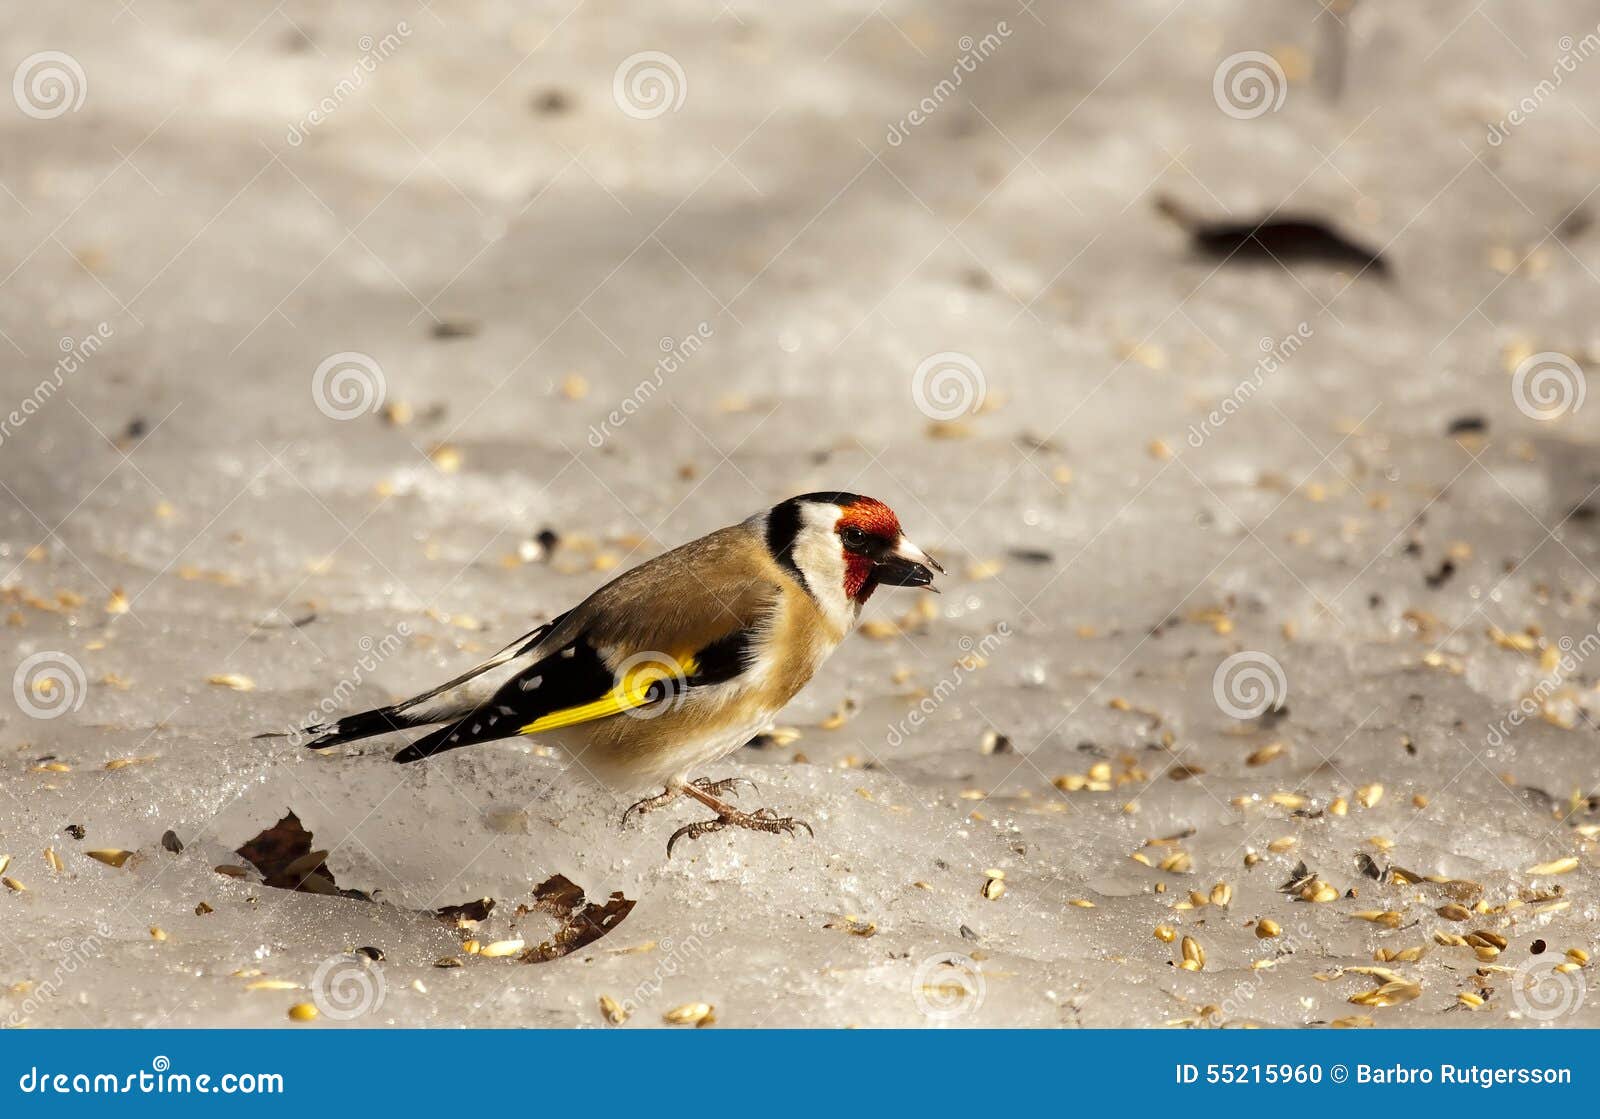 A goldfinch on a slippery surface